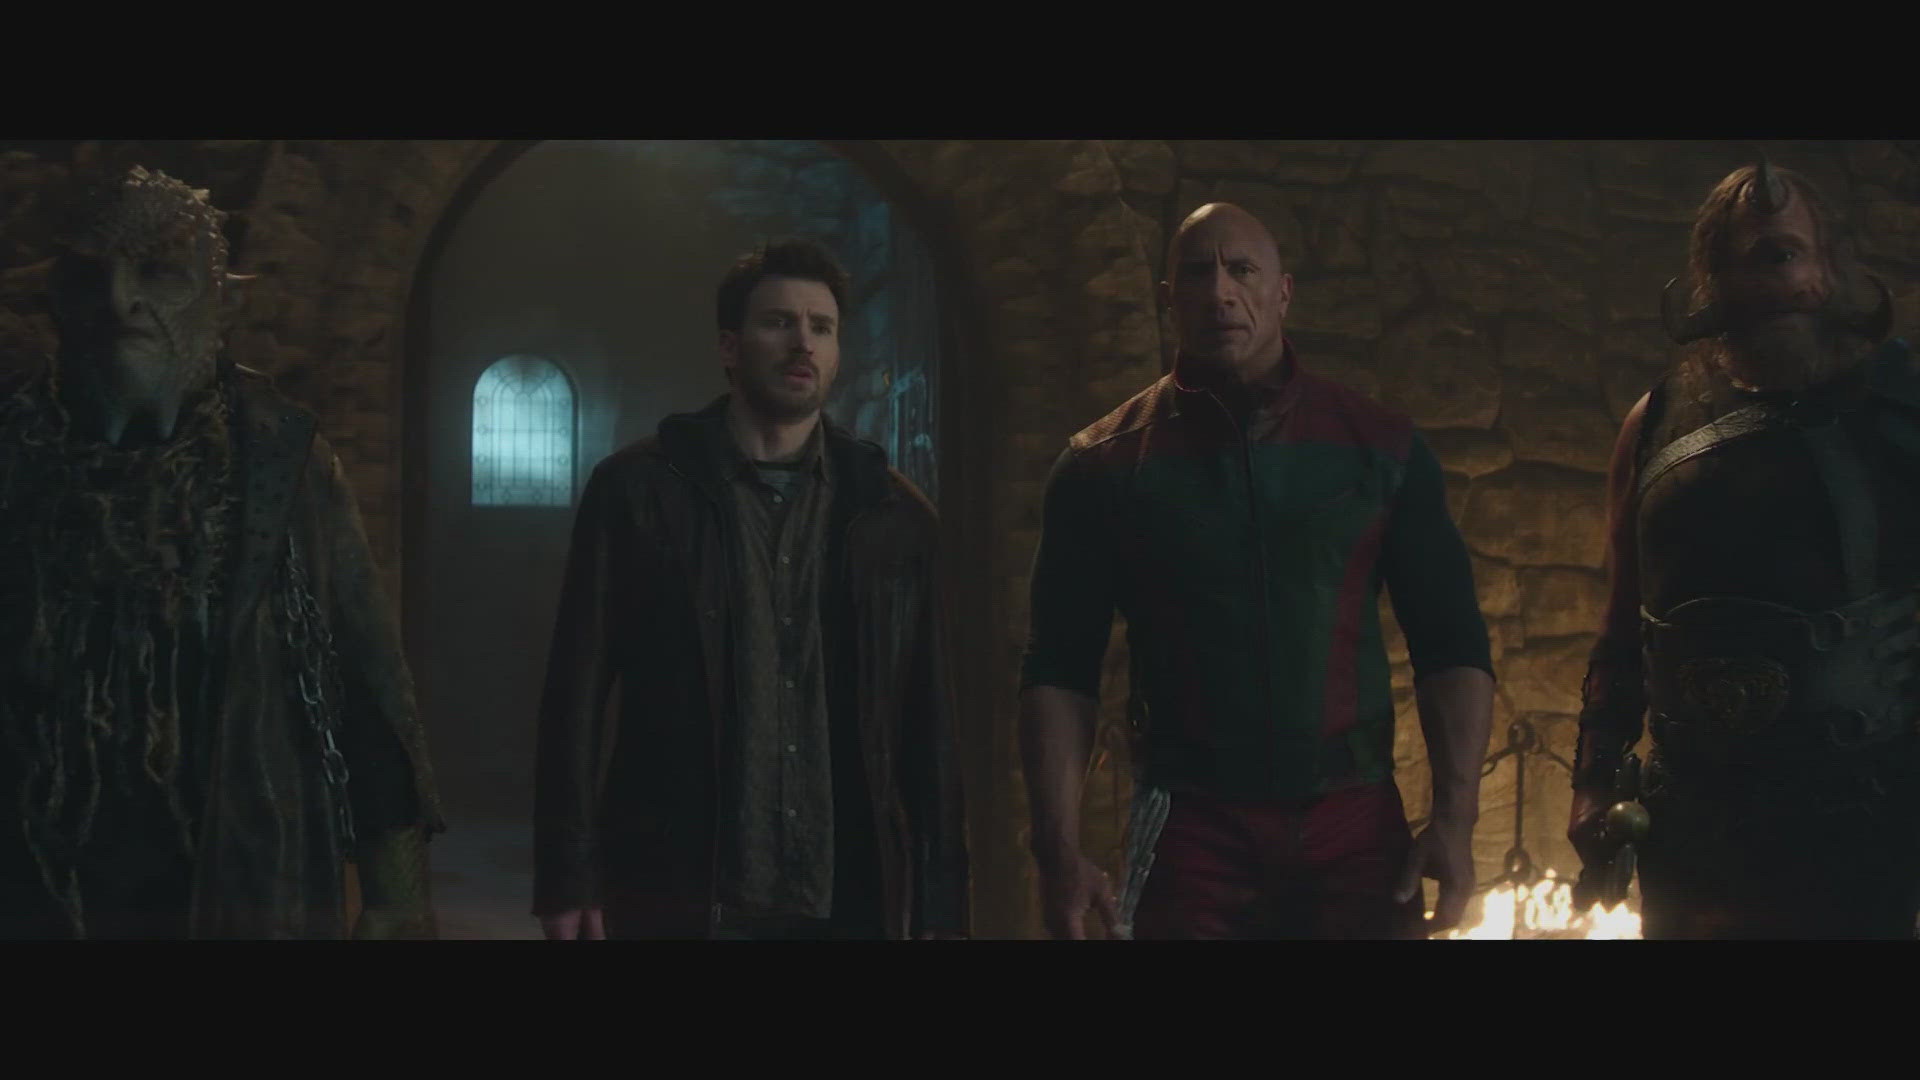 Chris Evans and Dwayne Johnson are suiting up to find Santa Claus in the first look at "Red One."